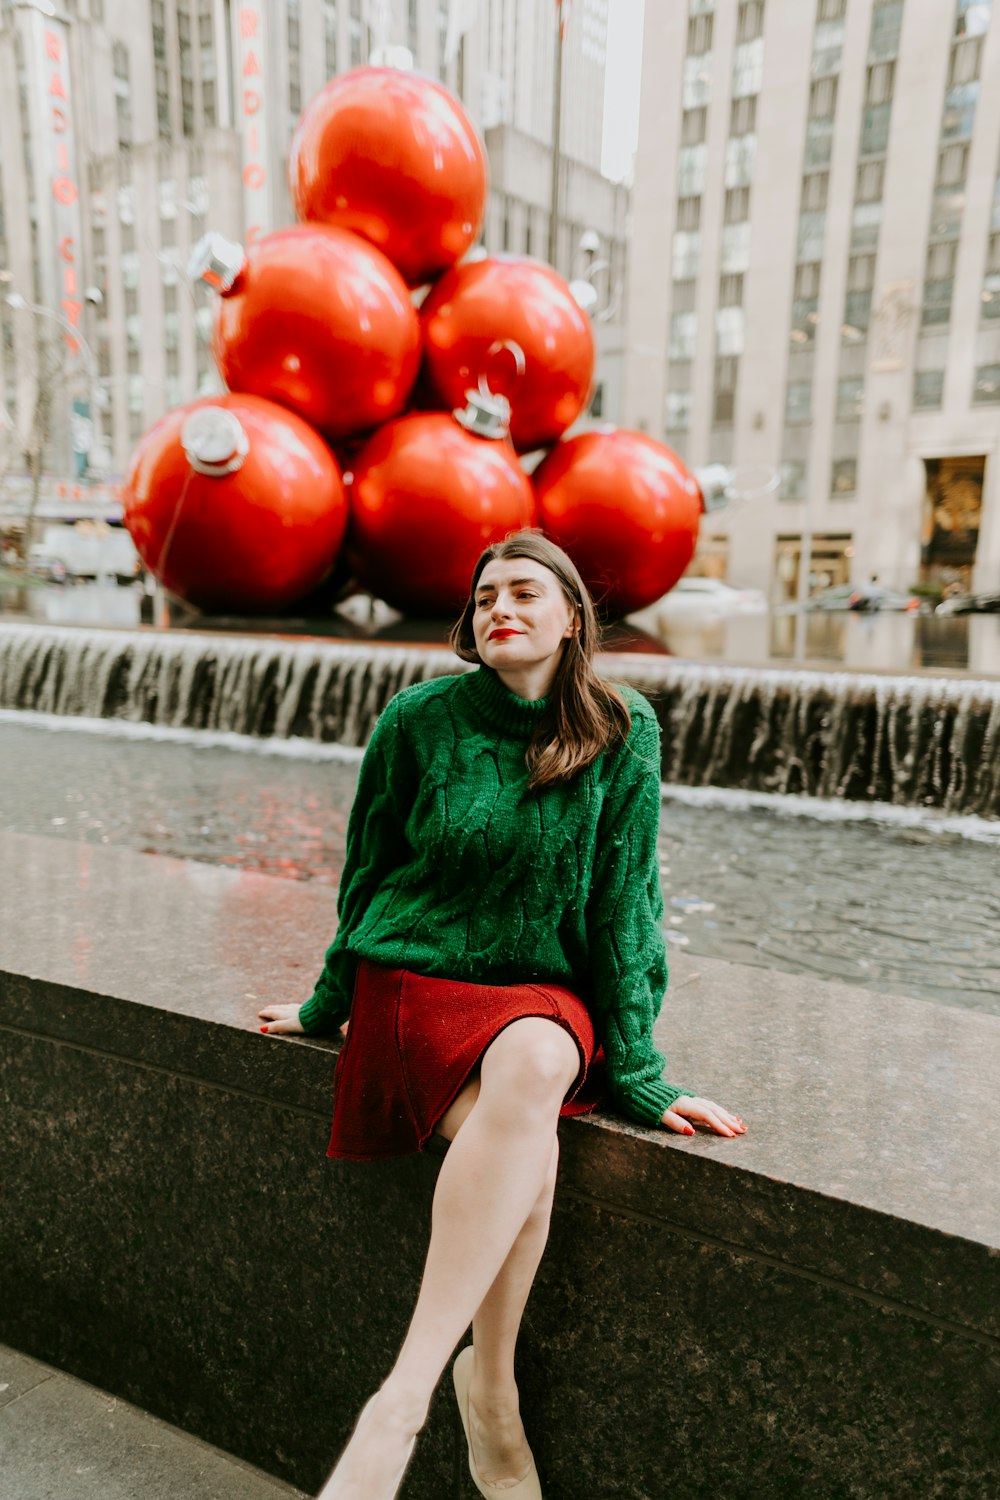 woman in green long sleeve shirt sitting on brown wooden bench holding red baubles